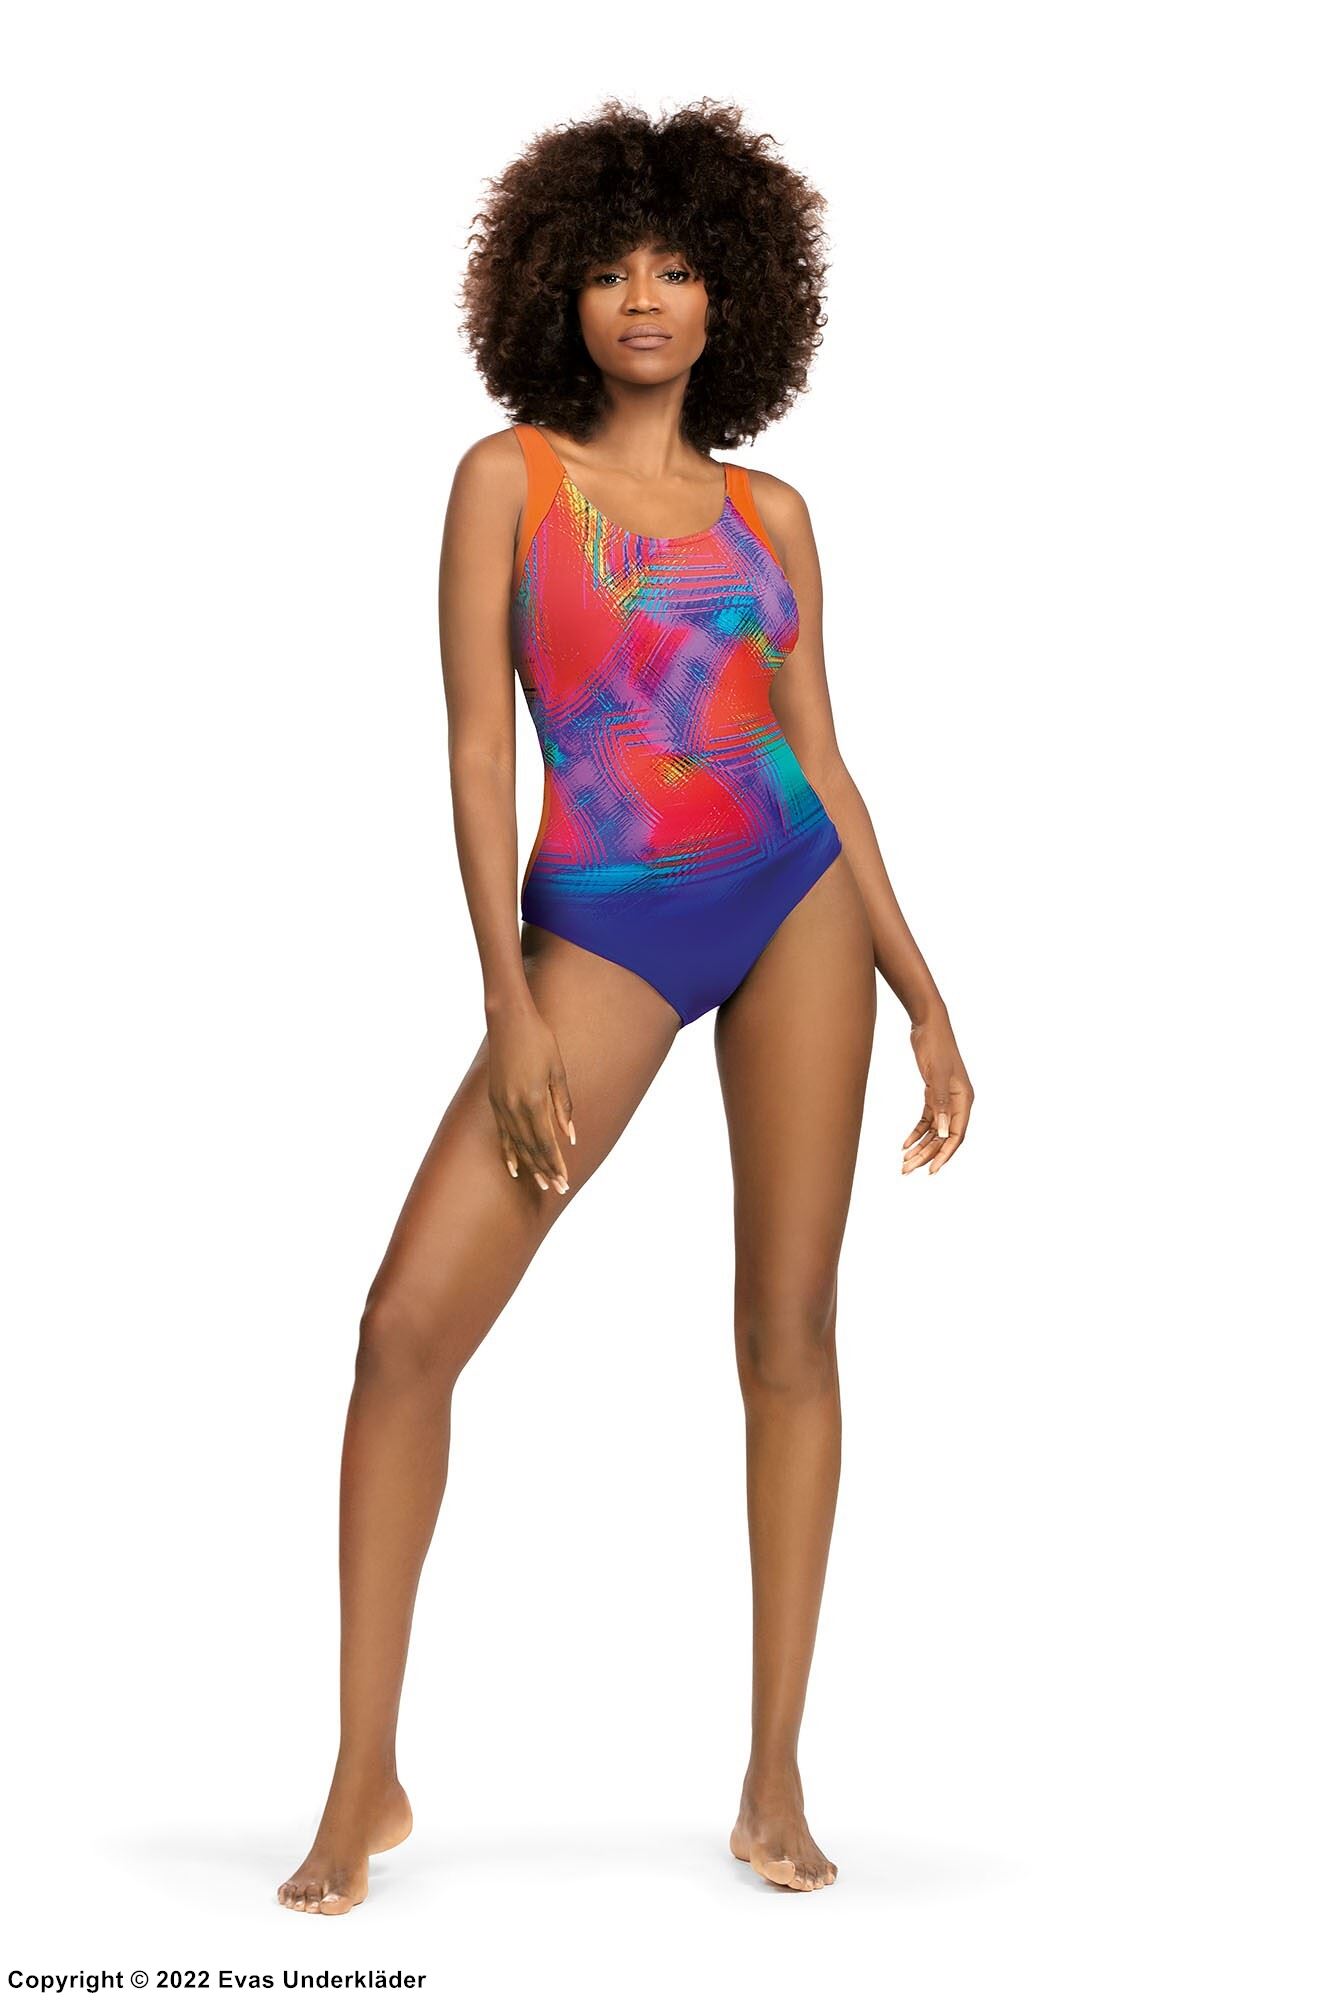 One-piece swimsuit, wide shoulder straps, cheerful colors